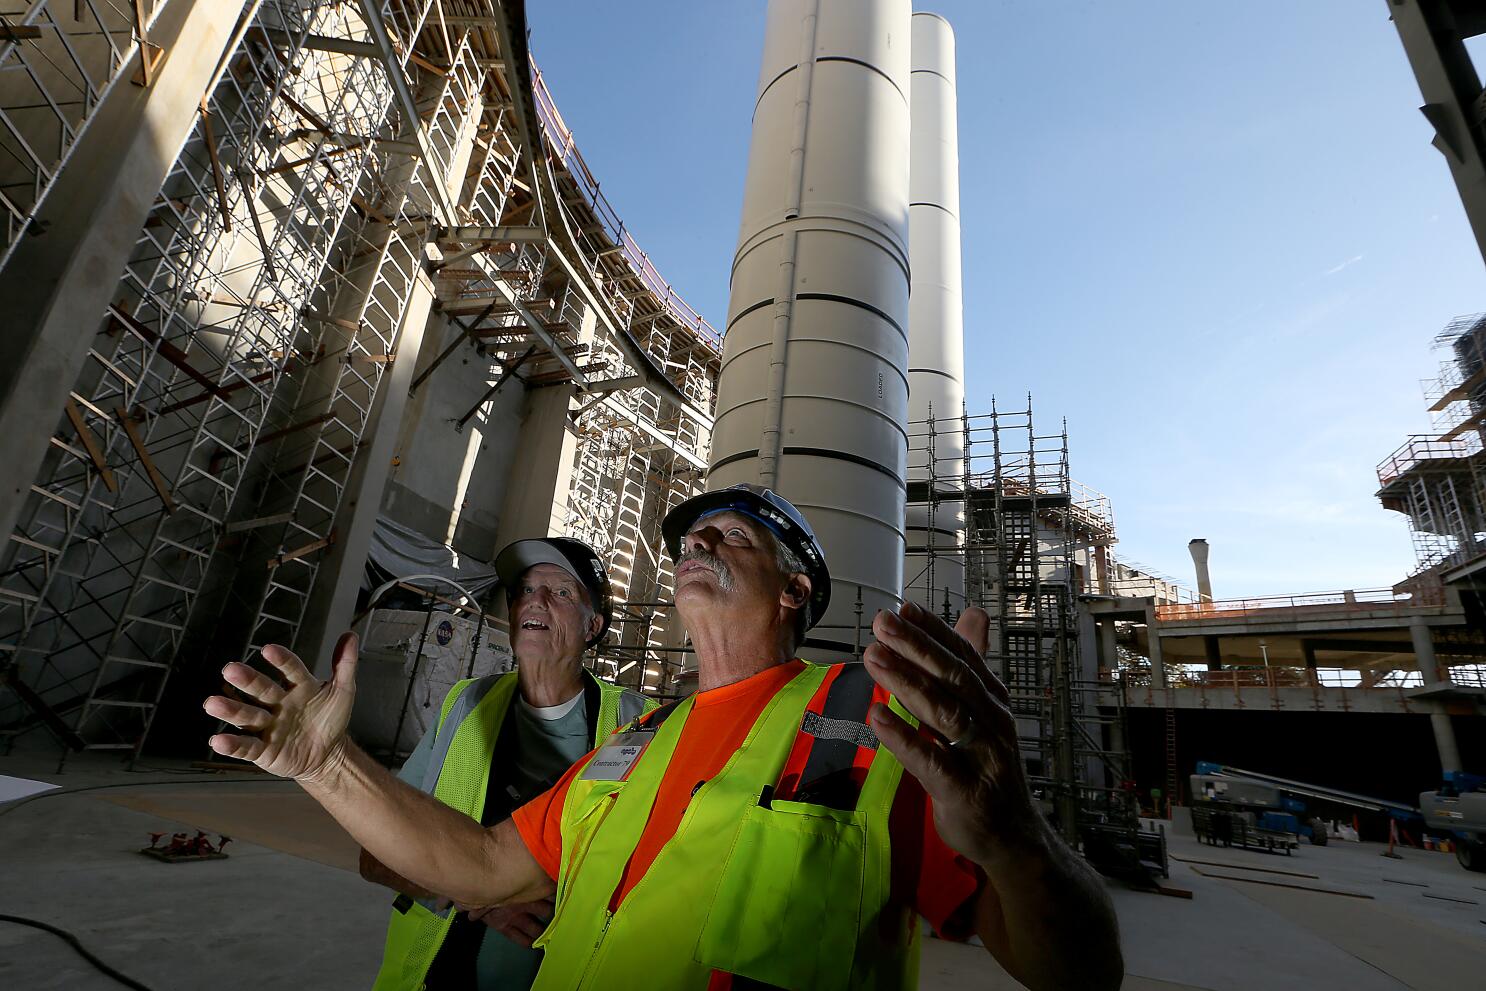 Endeavour assembly at Science Center starts with lifting 52-ton rockets  into place